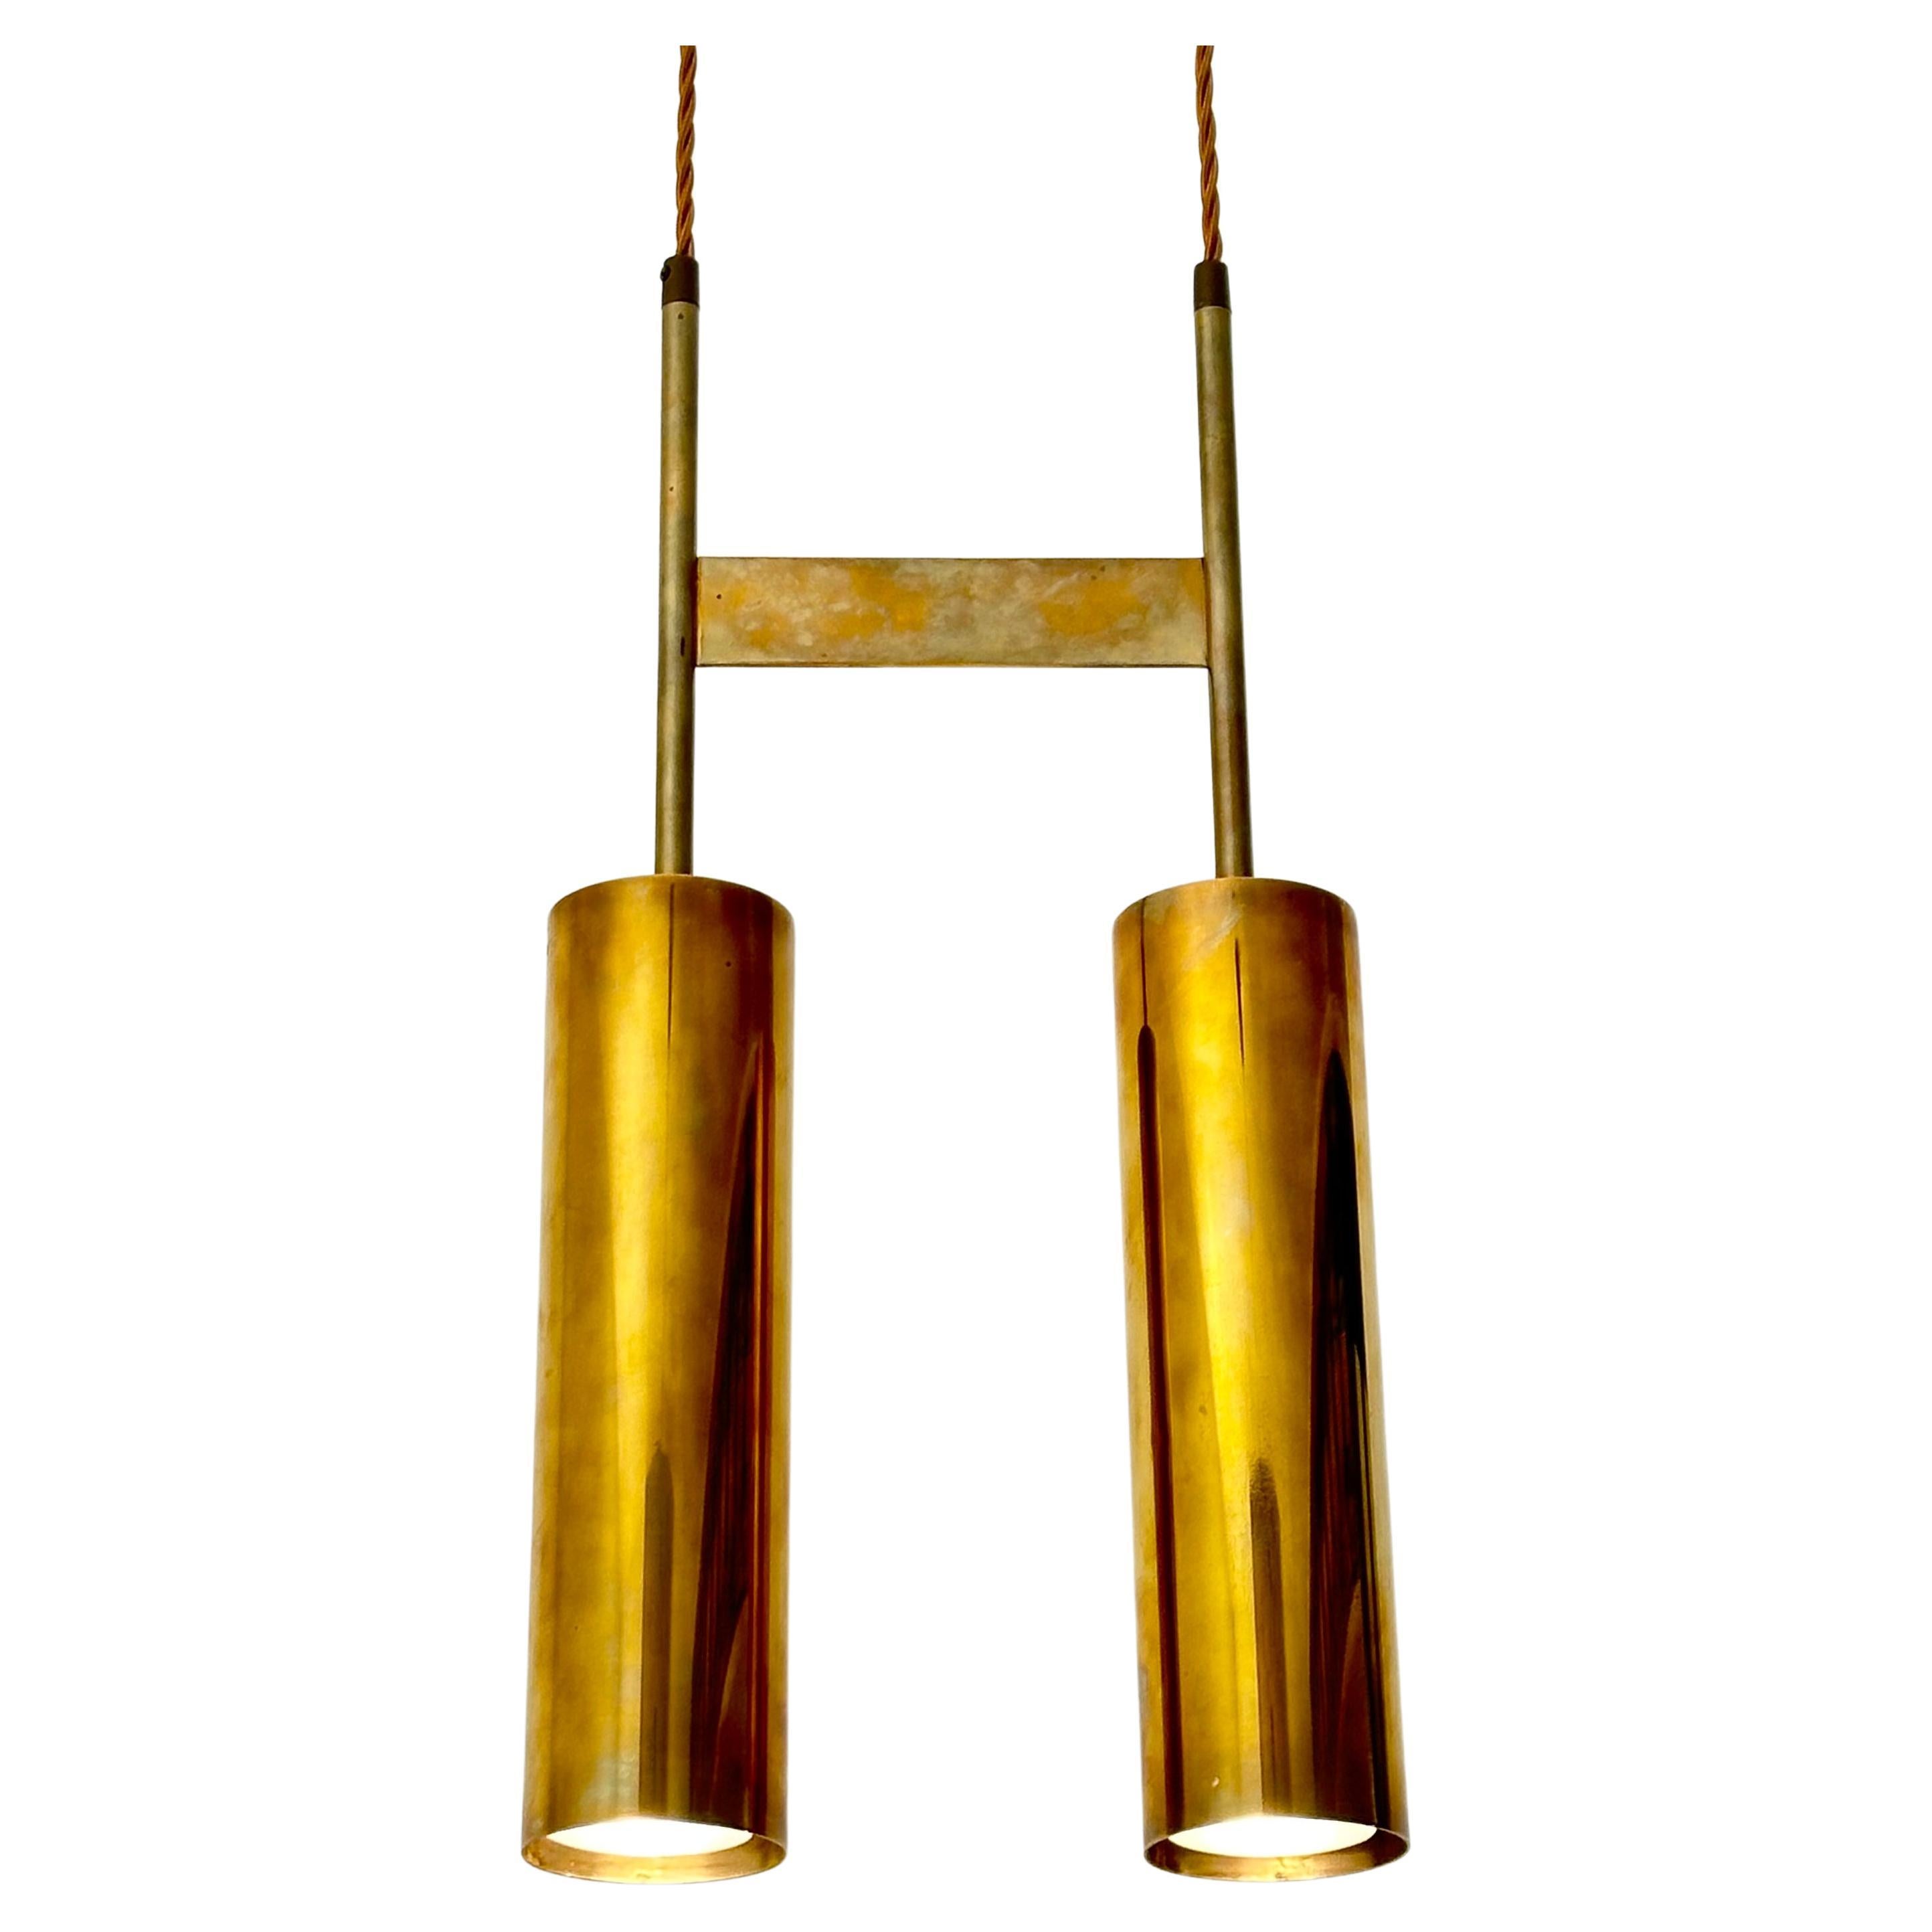 Modernist Solid Brass Double Cylinder Pendant Light Fixture, 1960s  For Sale